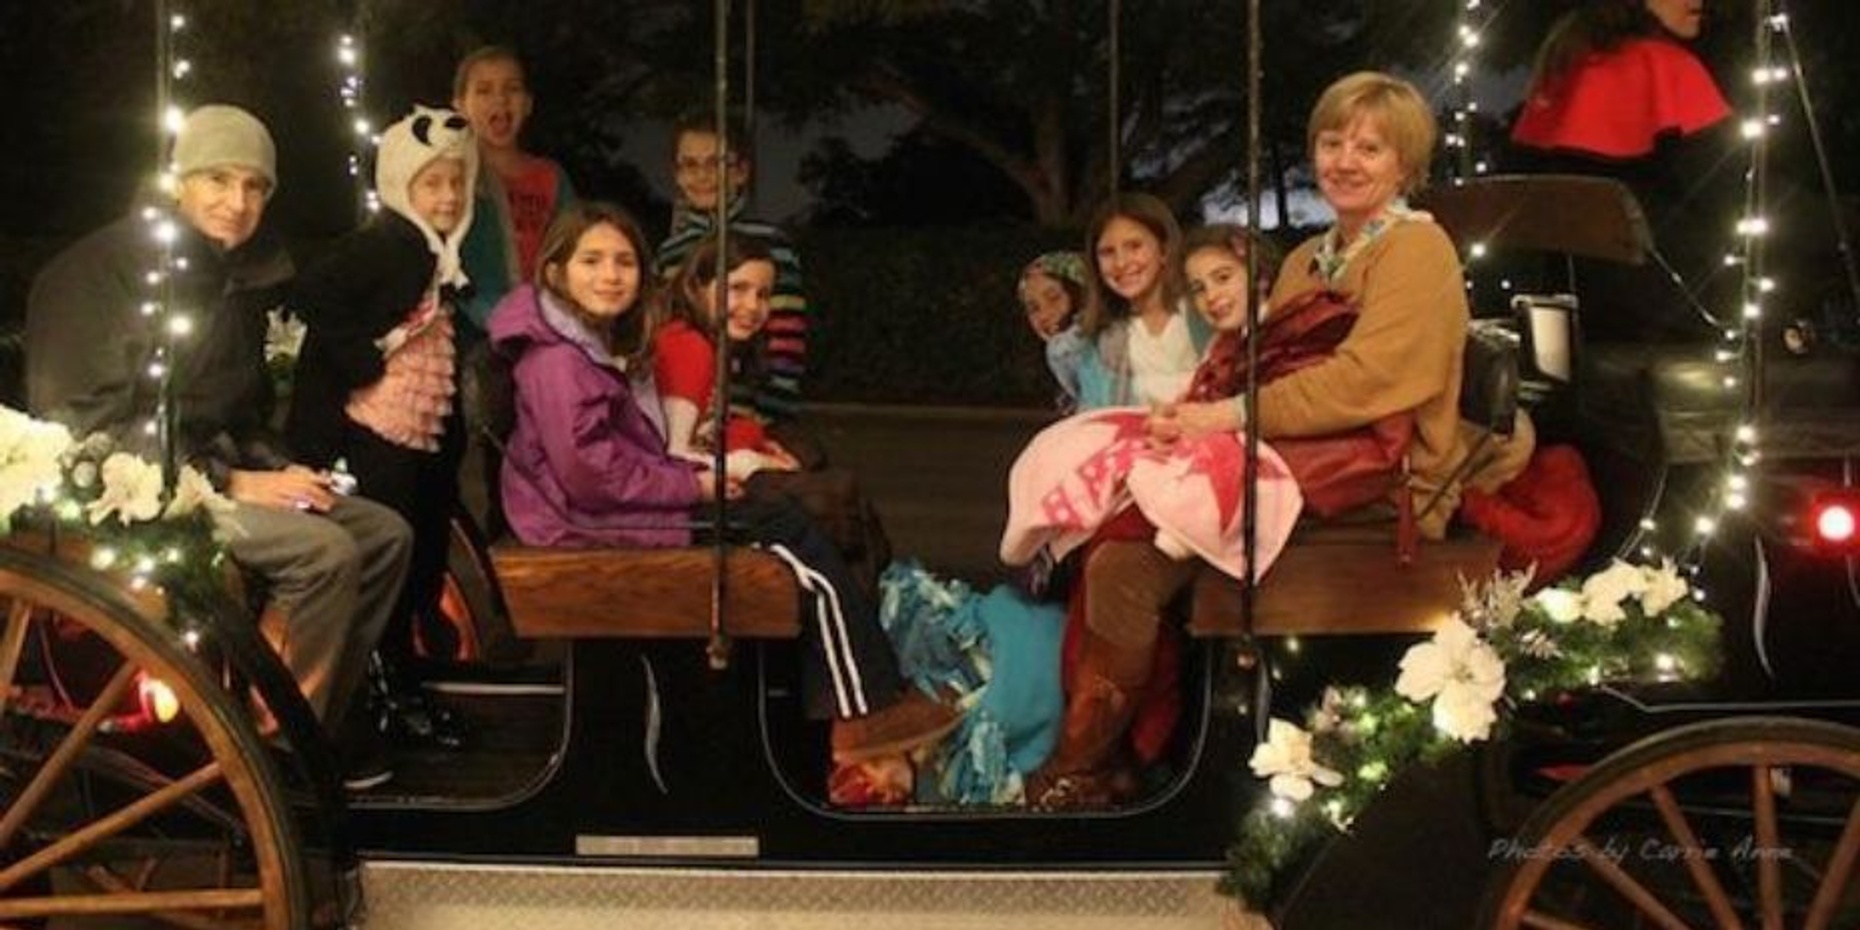 Charming Limo Carriage Ride for Nine in Highland Park